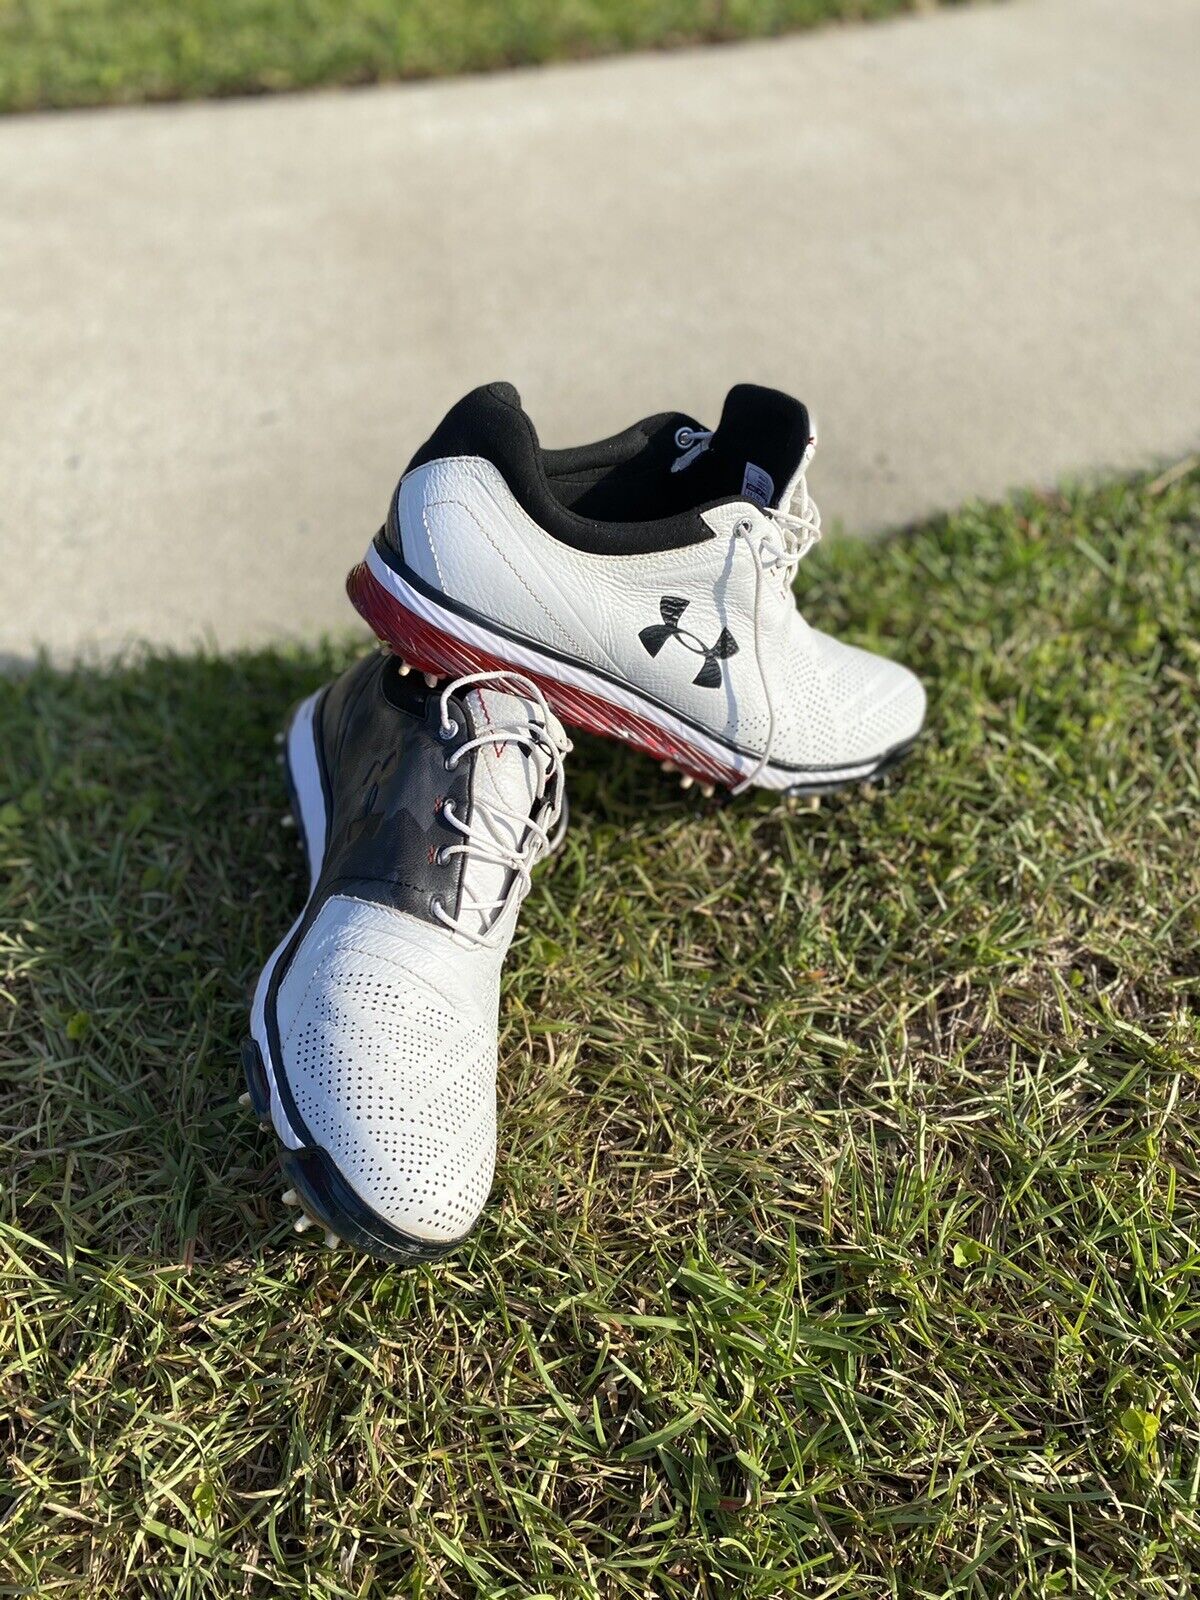 Under Armour Golf Shoes 9.5